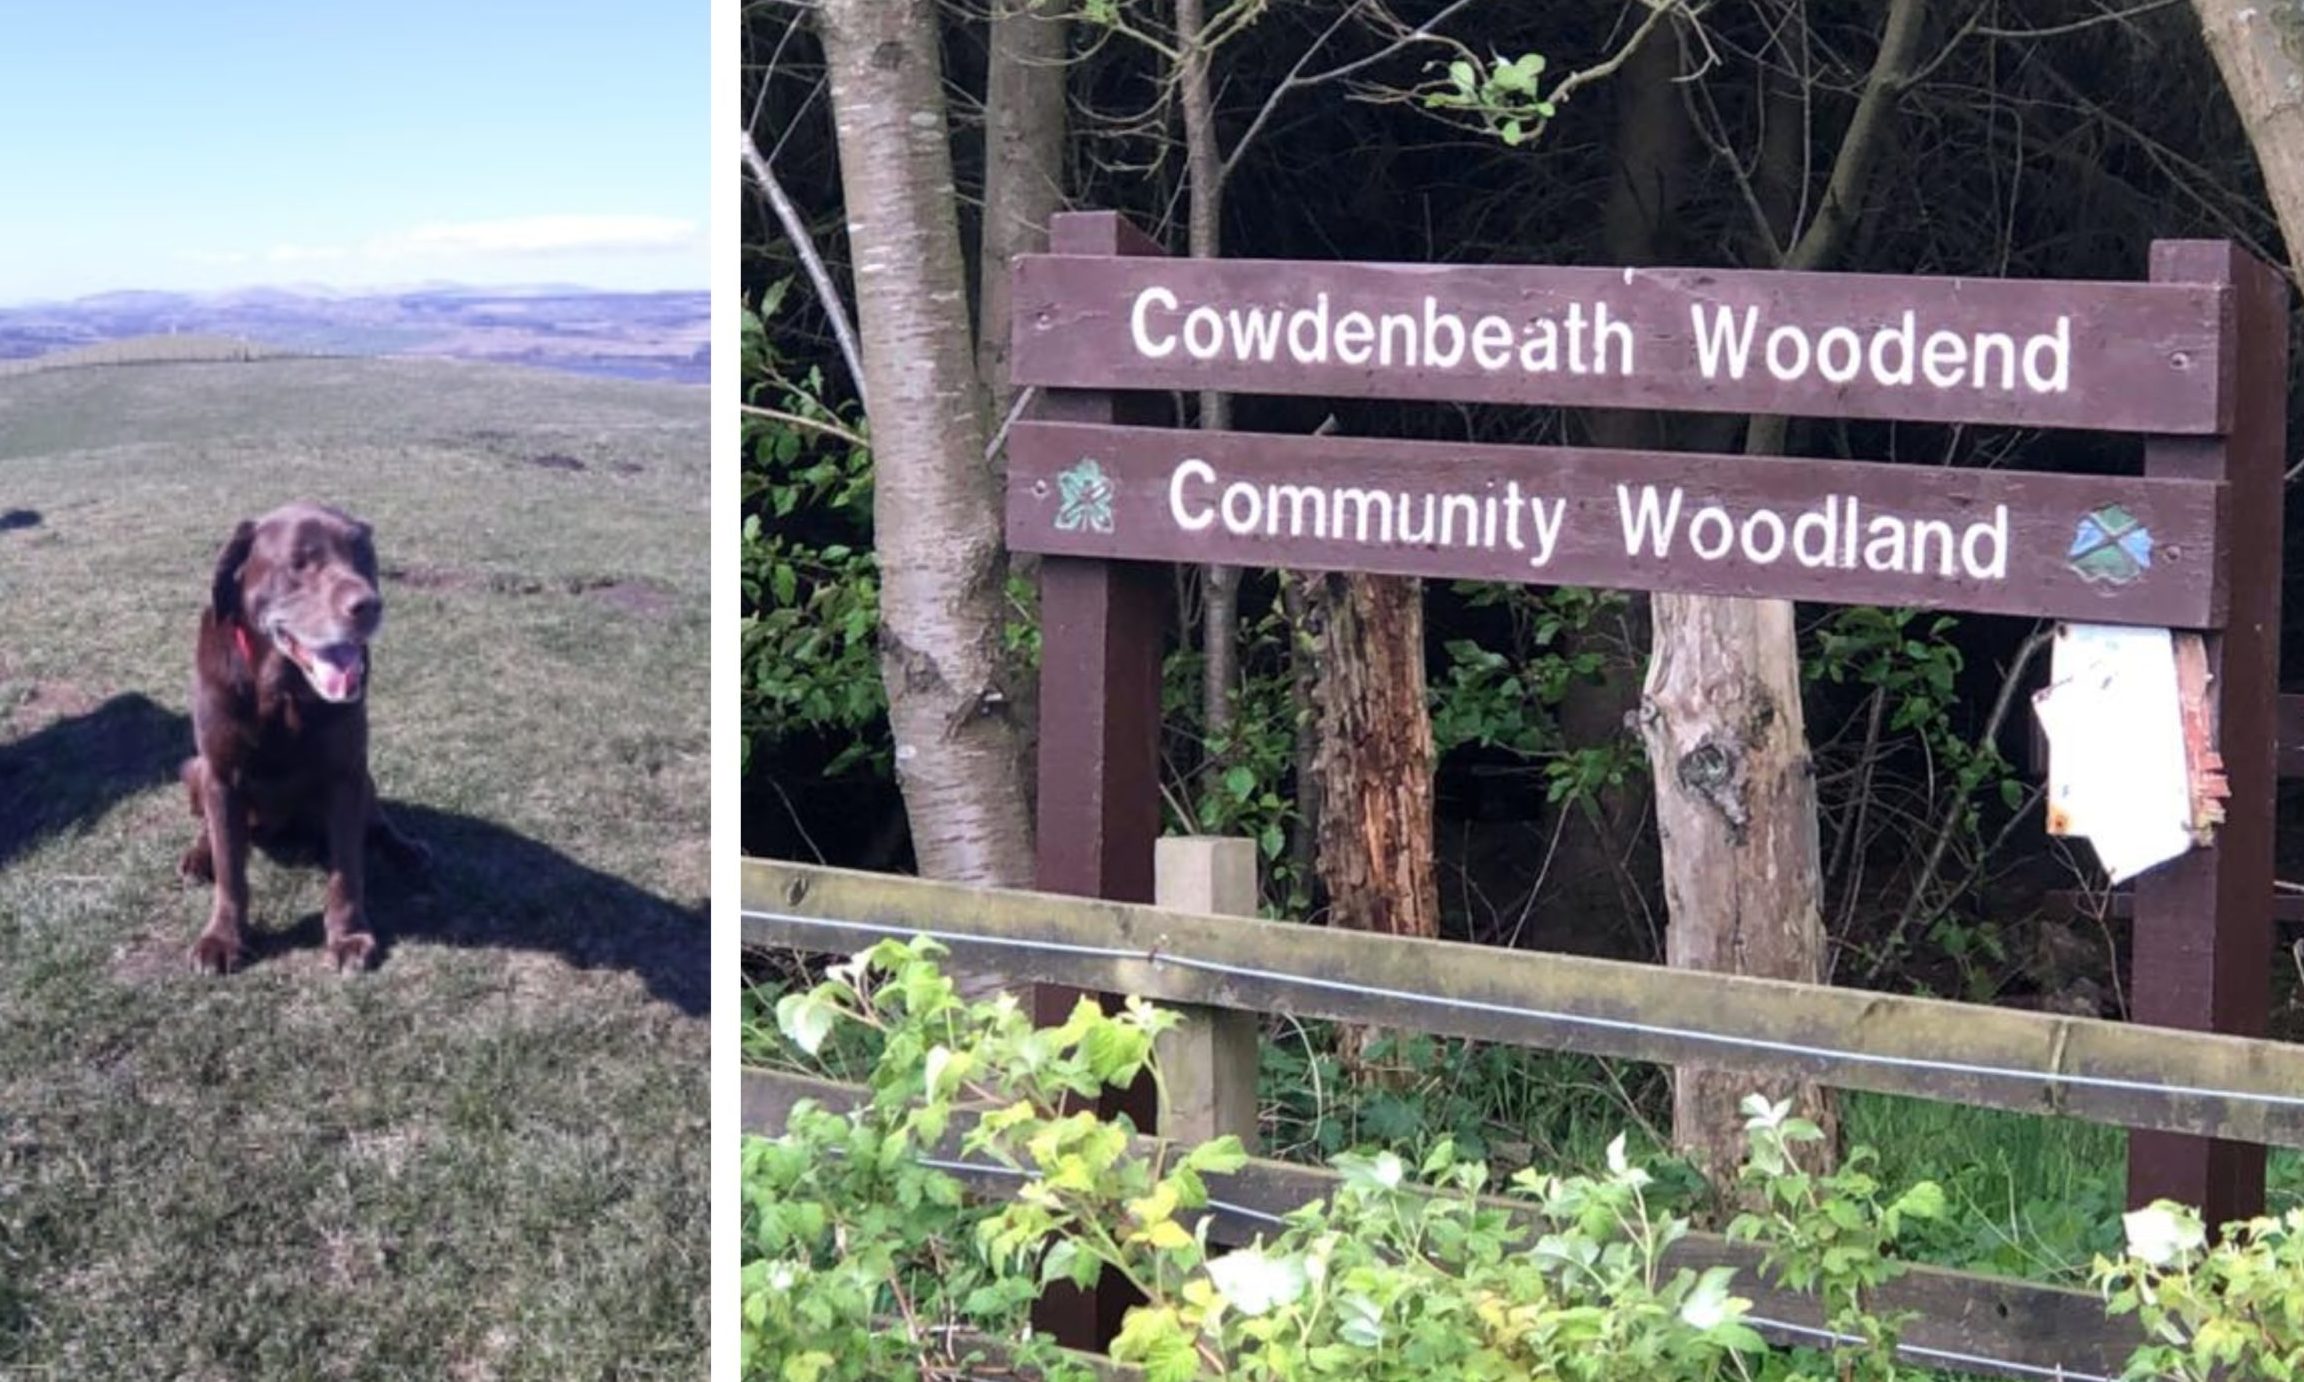 Ollie became unwell after the visit to Cowdenbeath Woodend Community Woodland.